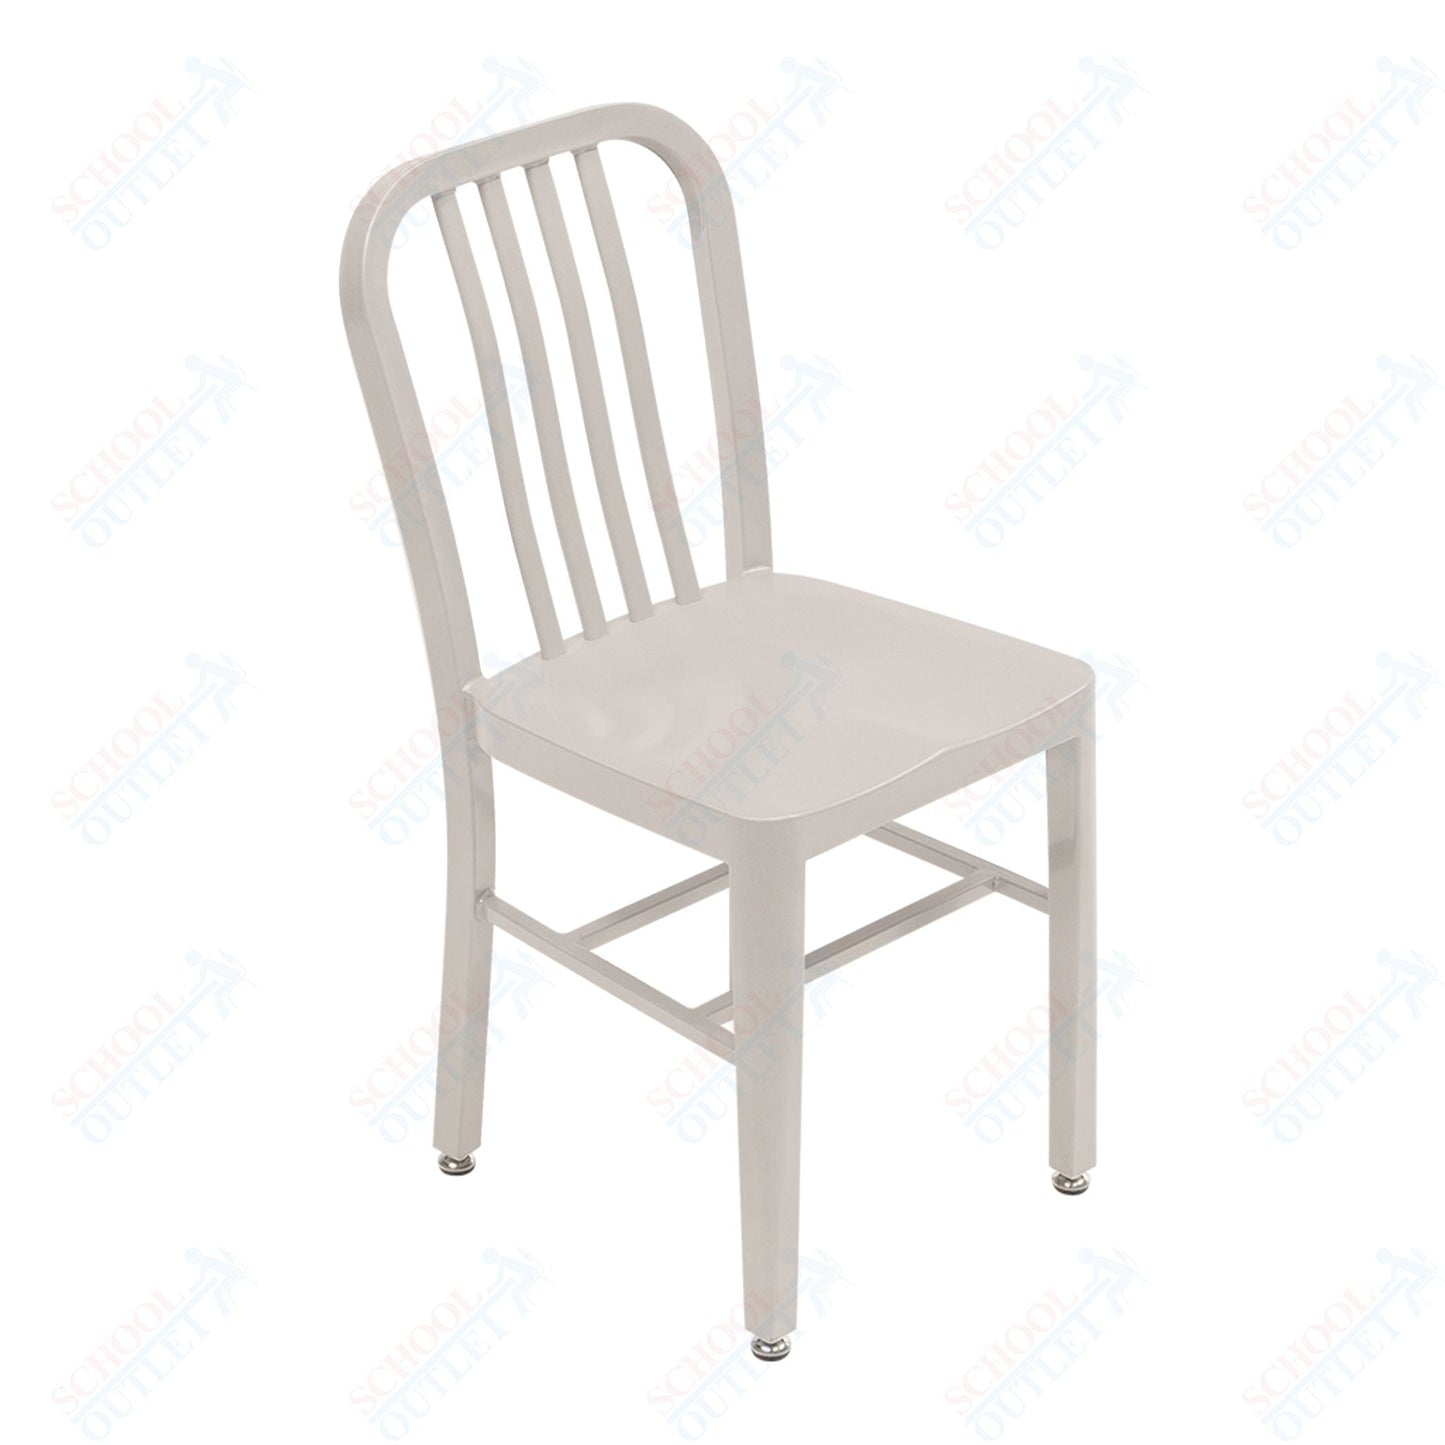 AmTab Cafe Chair - 15"W x 20"L x 33.25"H - Seat Height 18.5"H (AMT - CAFECHAIR - 5) - SchoolOutlet